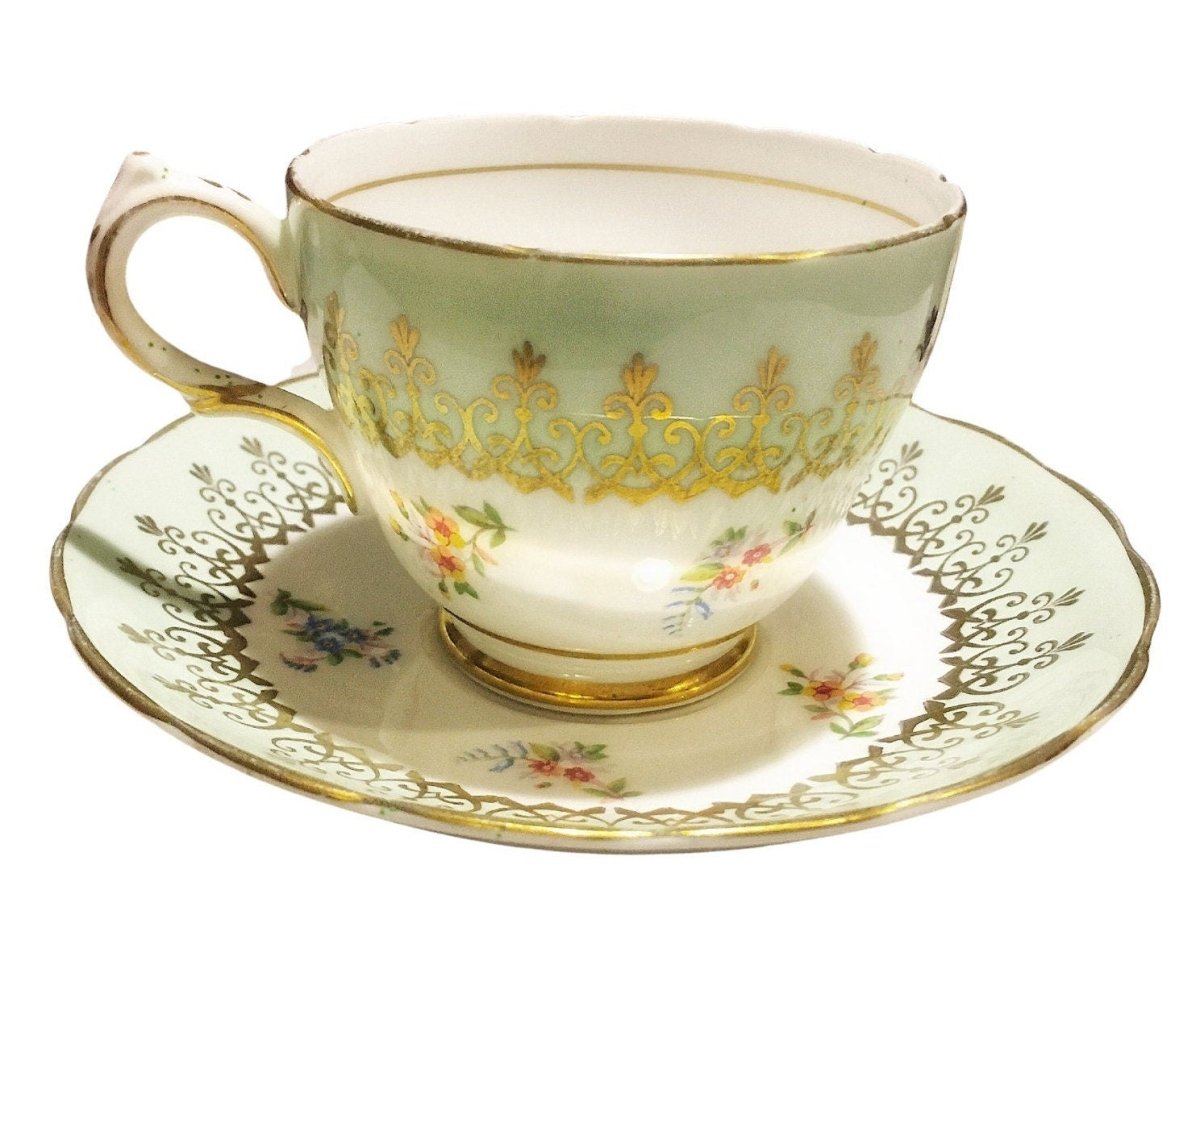 Grosvenor | Pale Mint Green & White English Bone China | Floral demitasse teacup and saucer, with gold overlay c. 1950s - Chinamania.shop